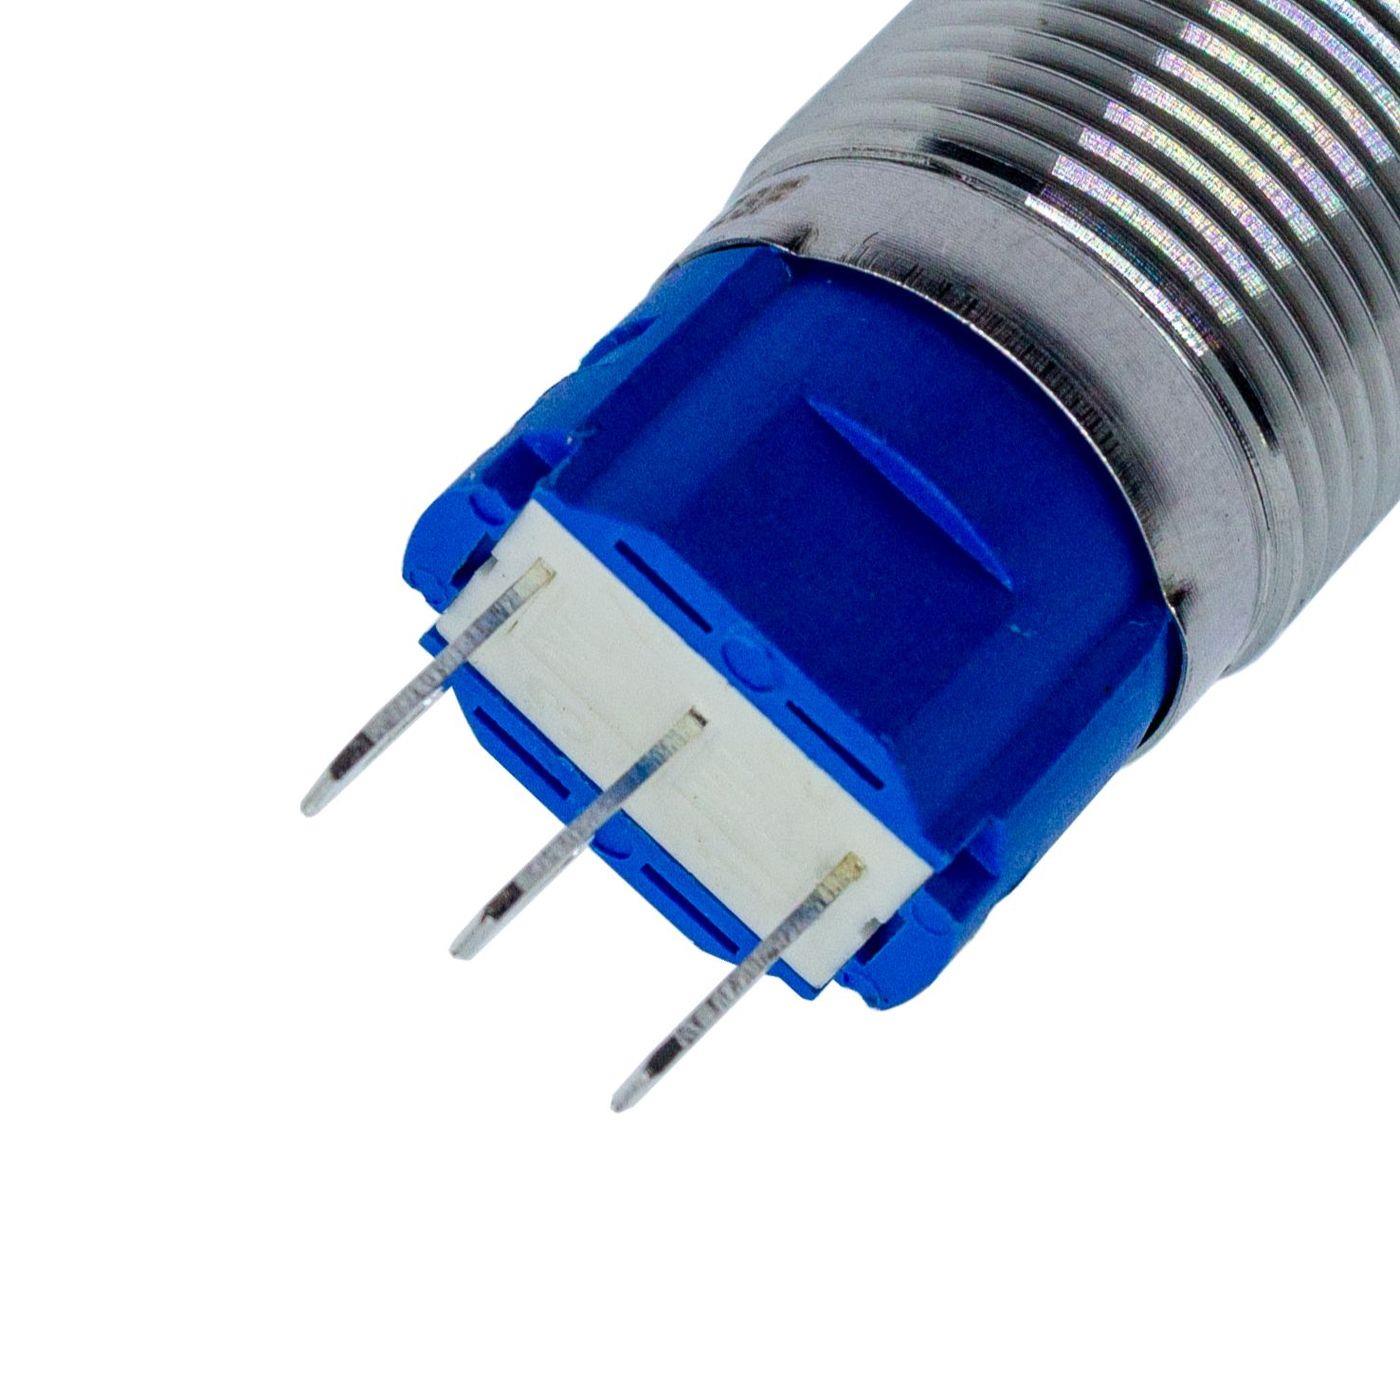 Stainless steel Pressure switch domed Ø16mm IP65 2,8x0,5mm Pins 250V 3A Vandal-proof